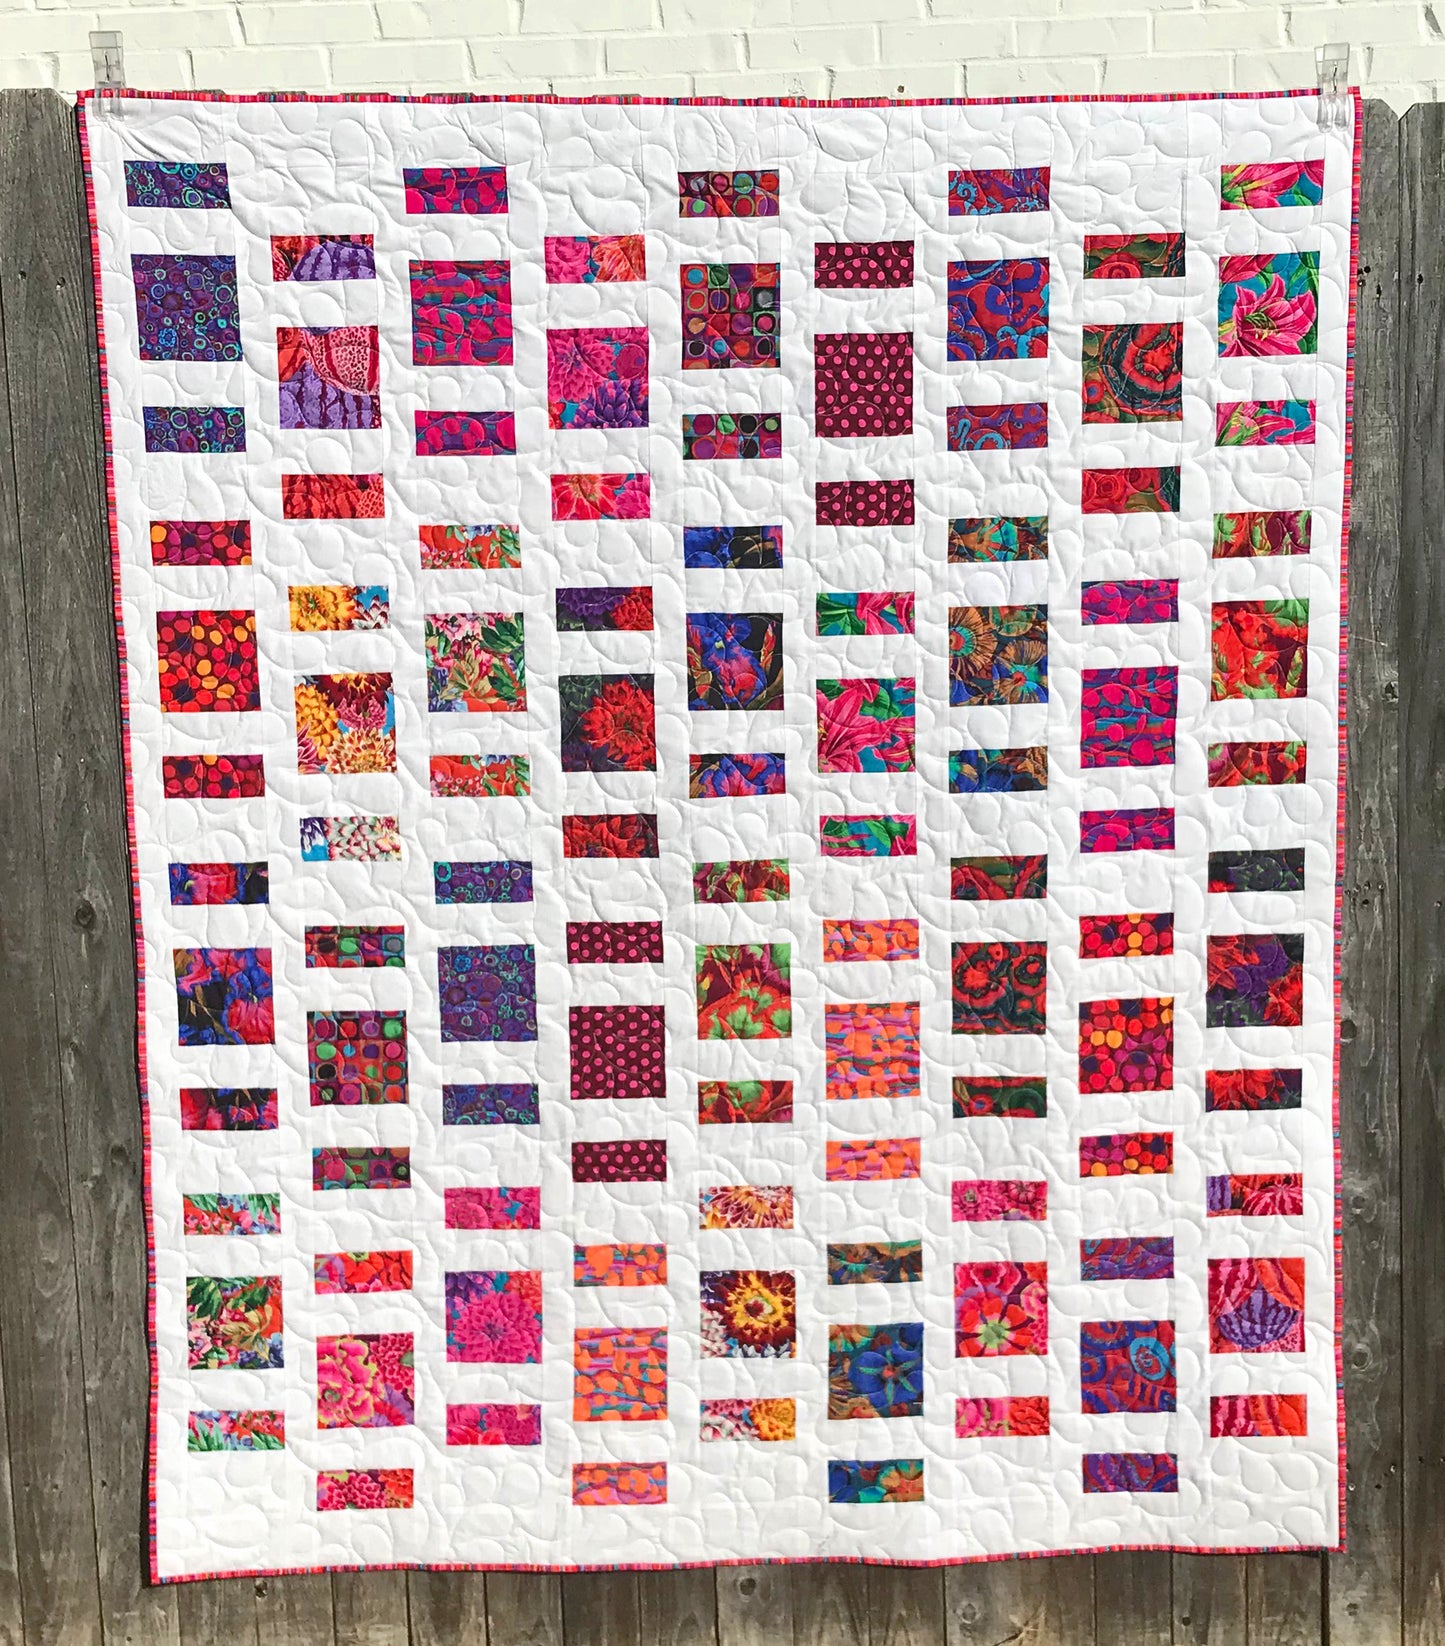 Quilt Pattern for charm squares that has nine columns of squares and rectangles with sashing between the columns. Quilt is displayed on a fence with colorful Kaffe Fassett fabrics.